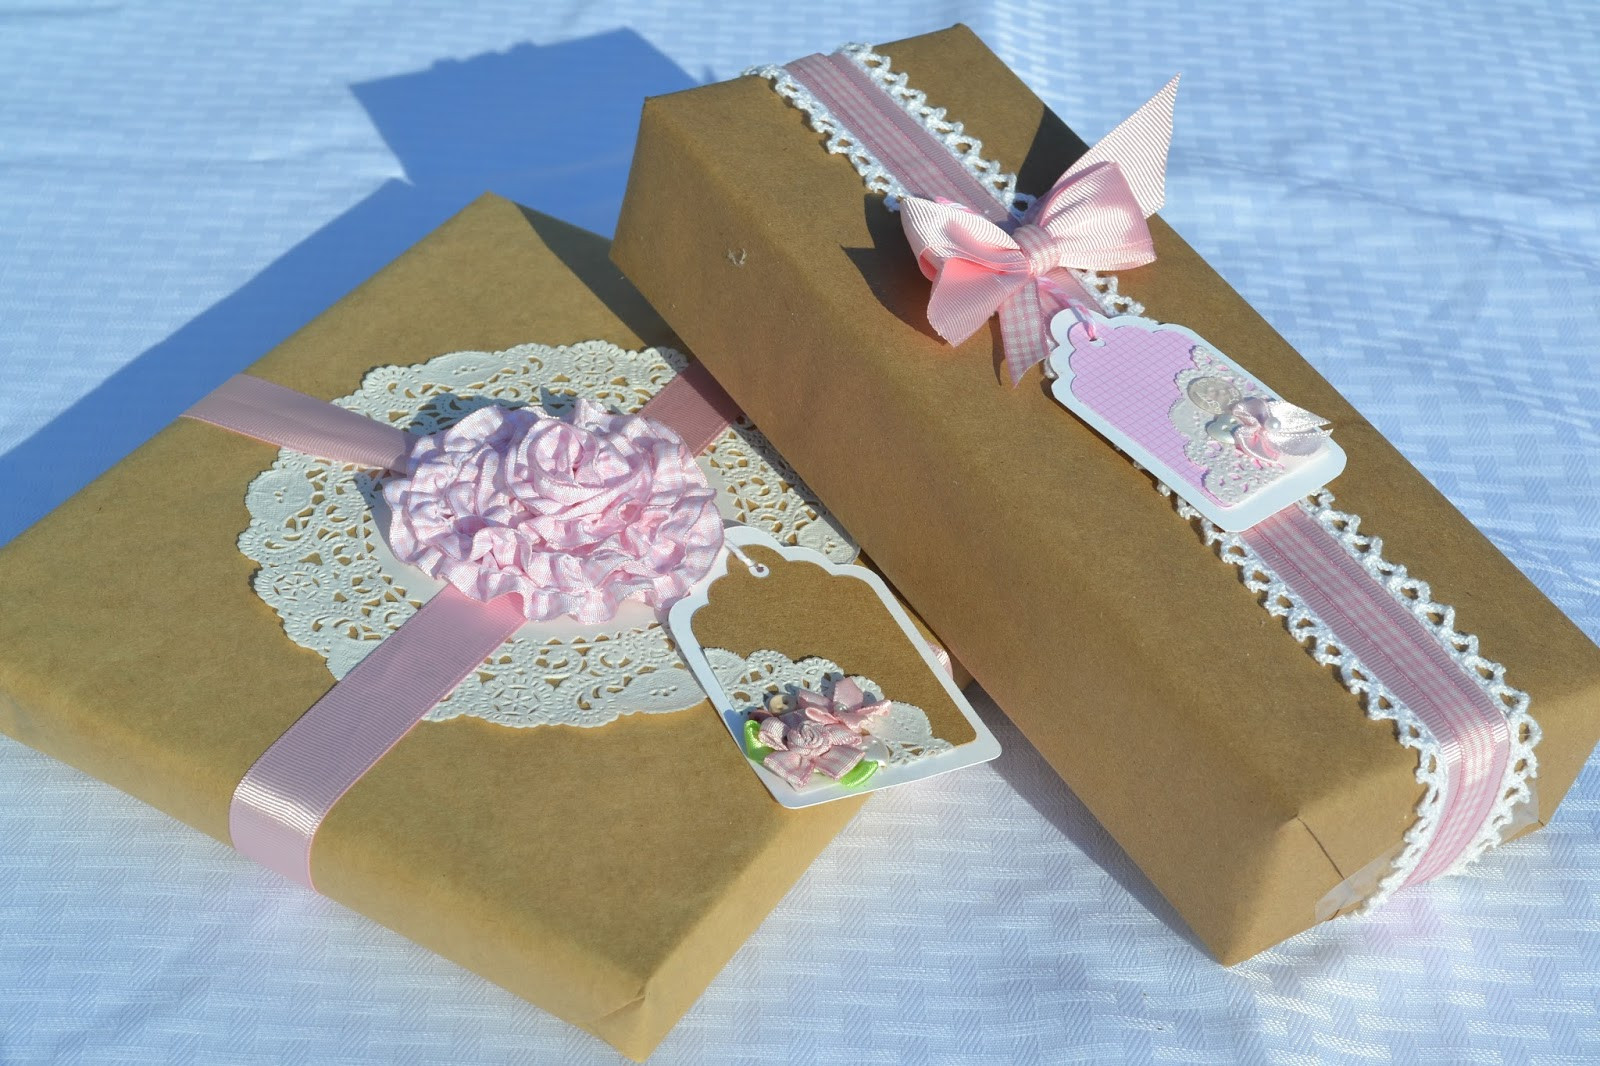 Unique Gift Wrapping Ideas For Baby Shower
 Corner of Plaid and Paisley Gift Wrapping Posts